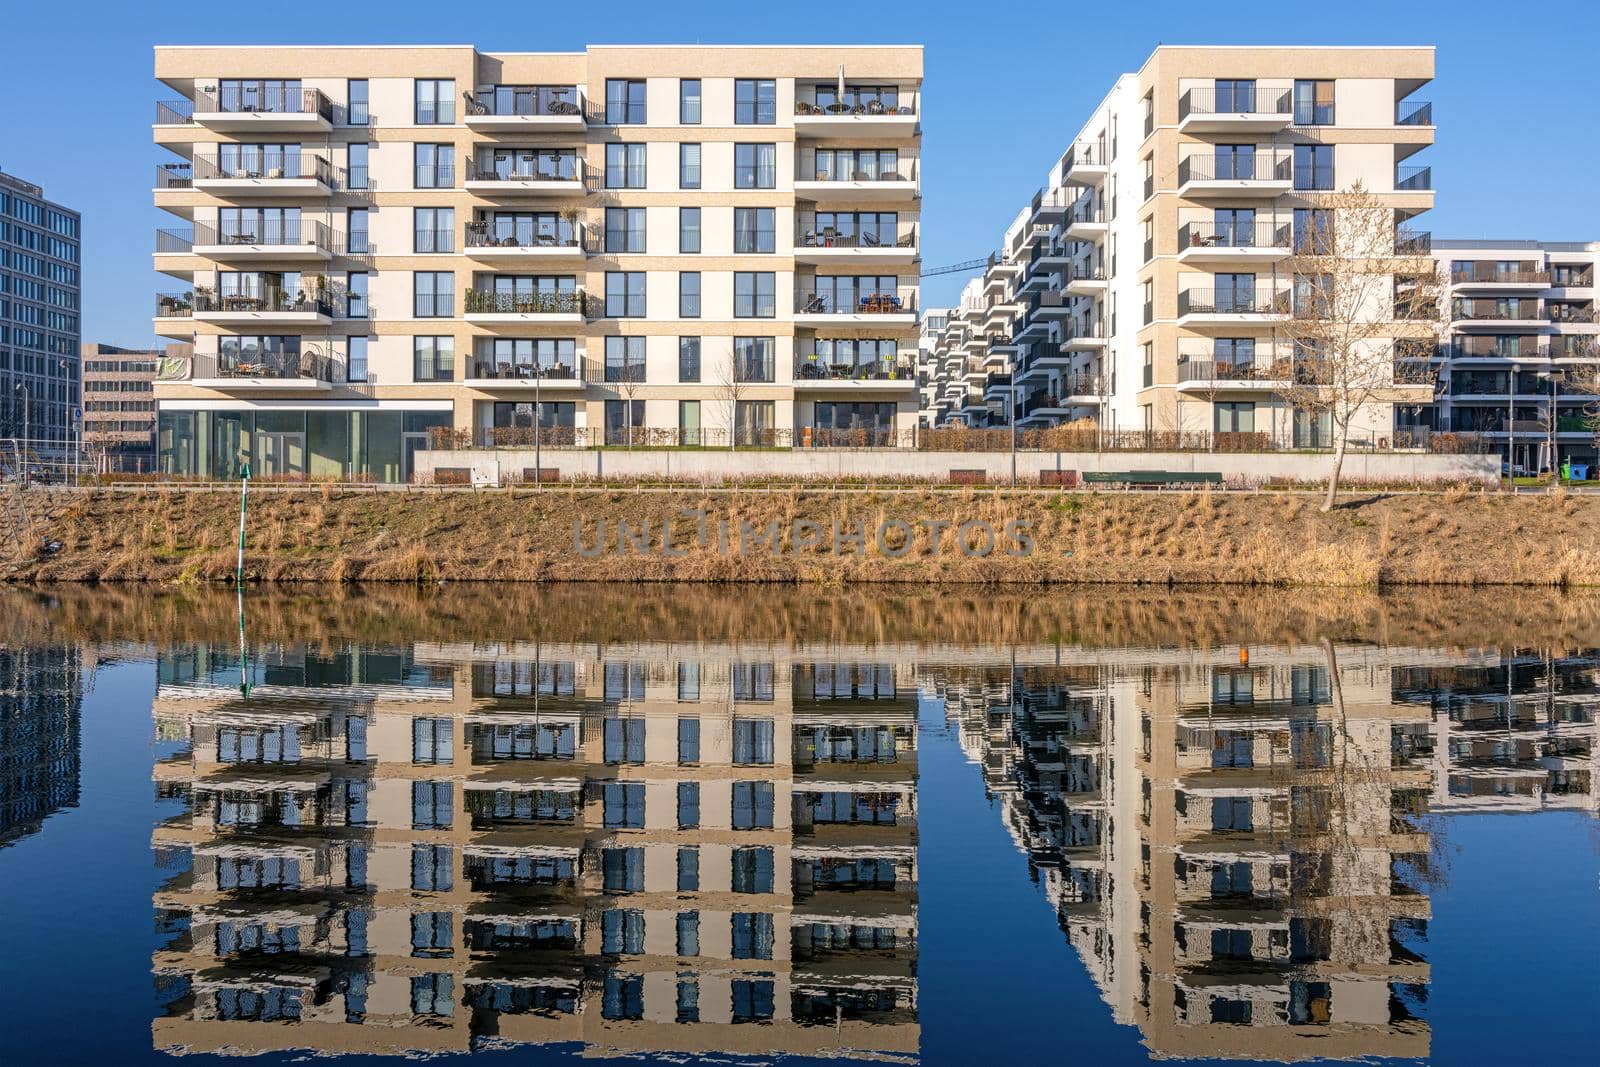 New apartment buildings reflecting in a canal seen in Berlin, Germany